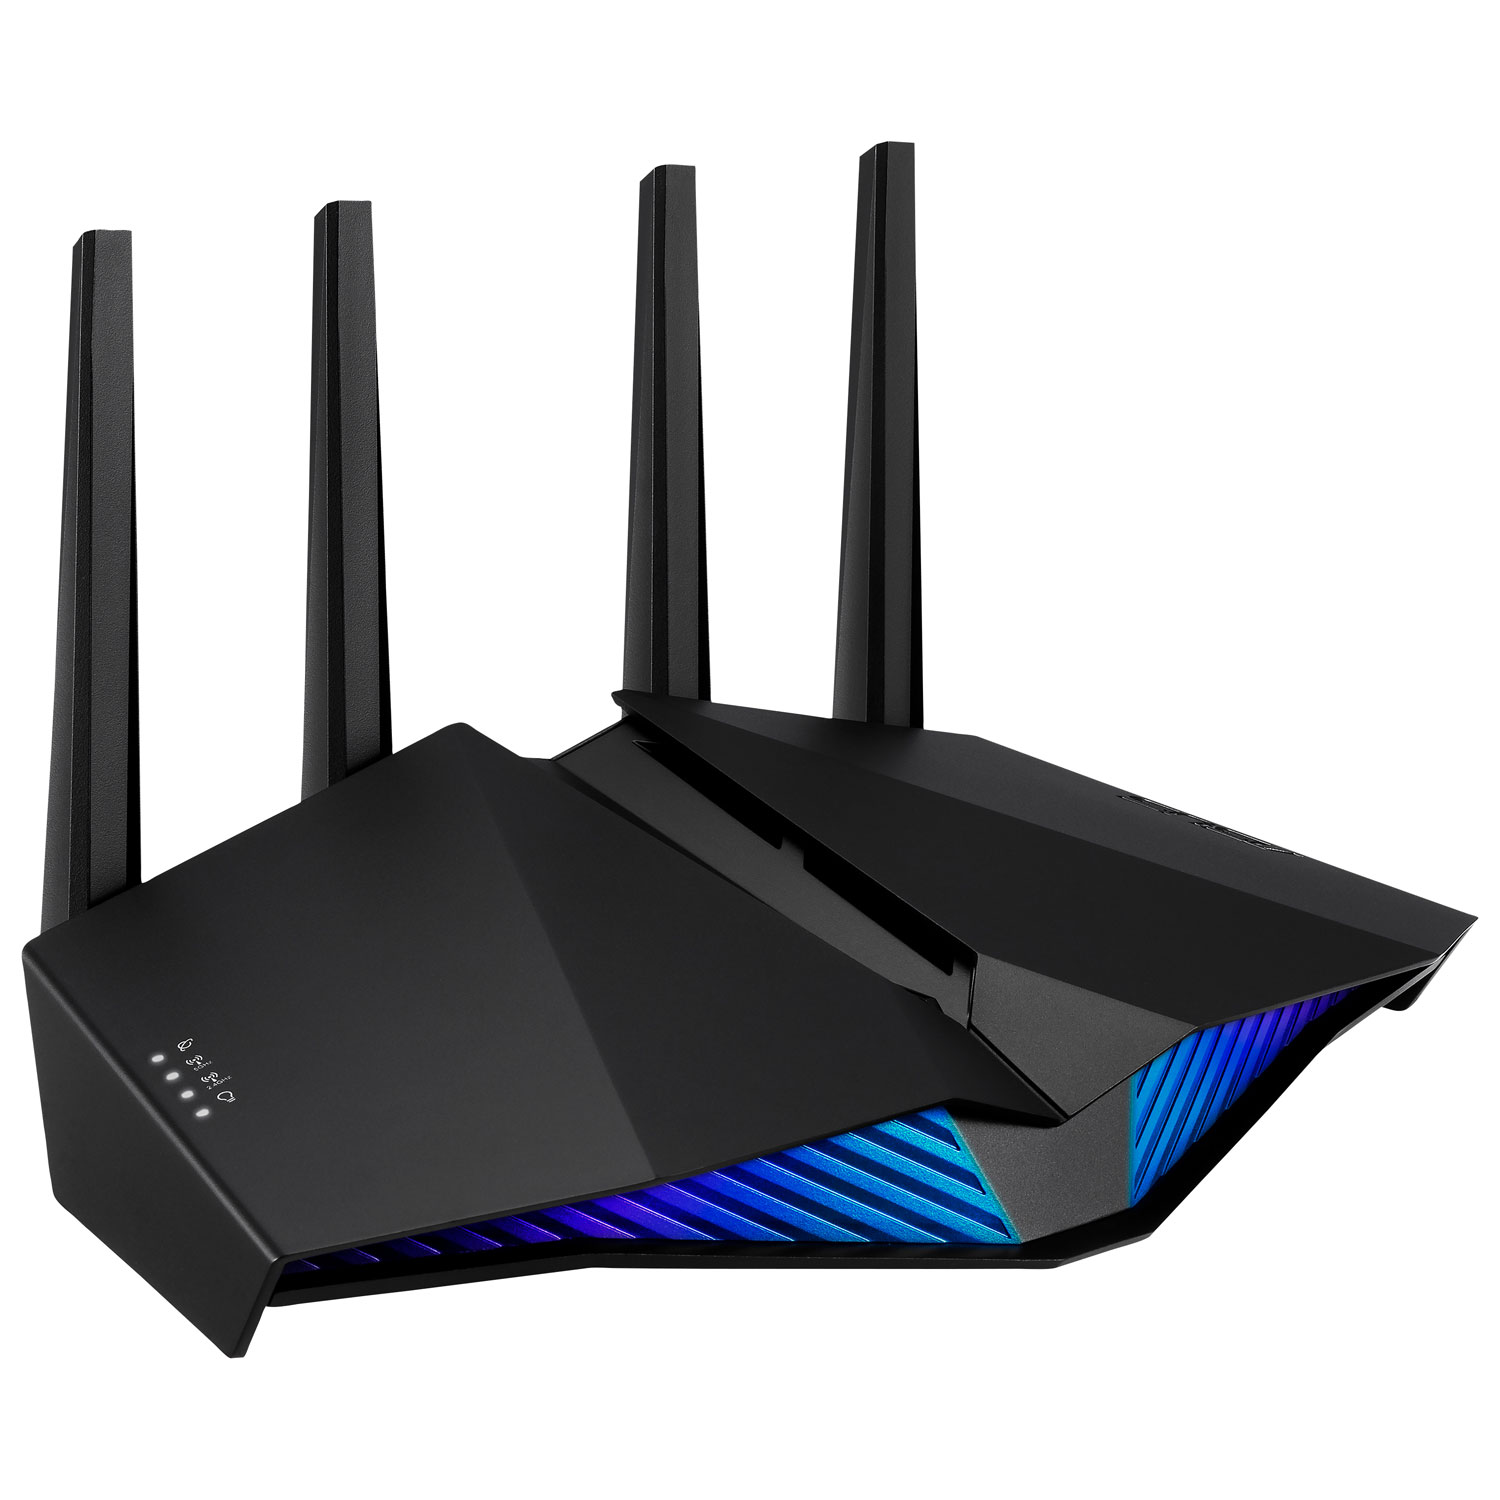 ASUS 6-Stream Wireless AX5400 Dual-Band Wi-Fi 6 Gaming Router (RT-AX82U)